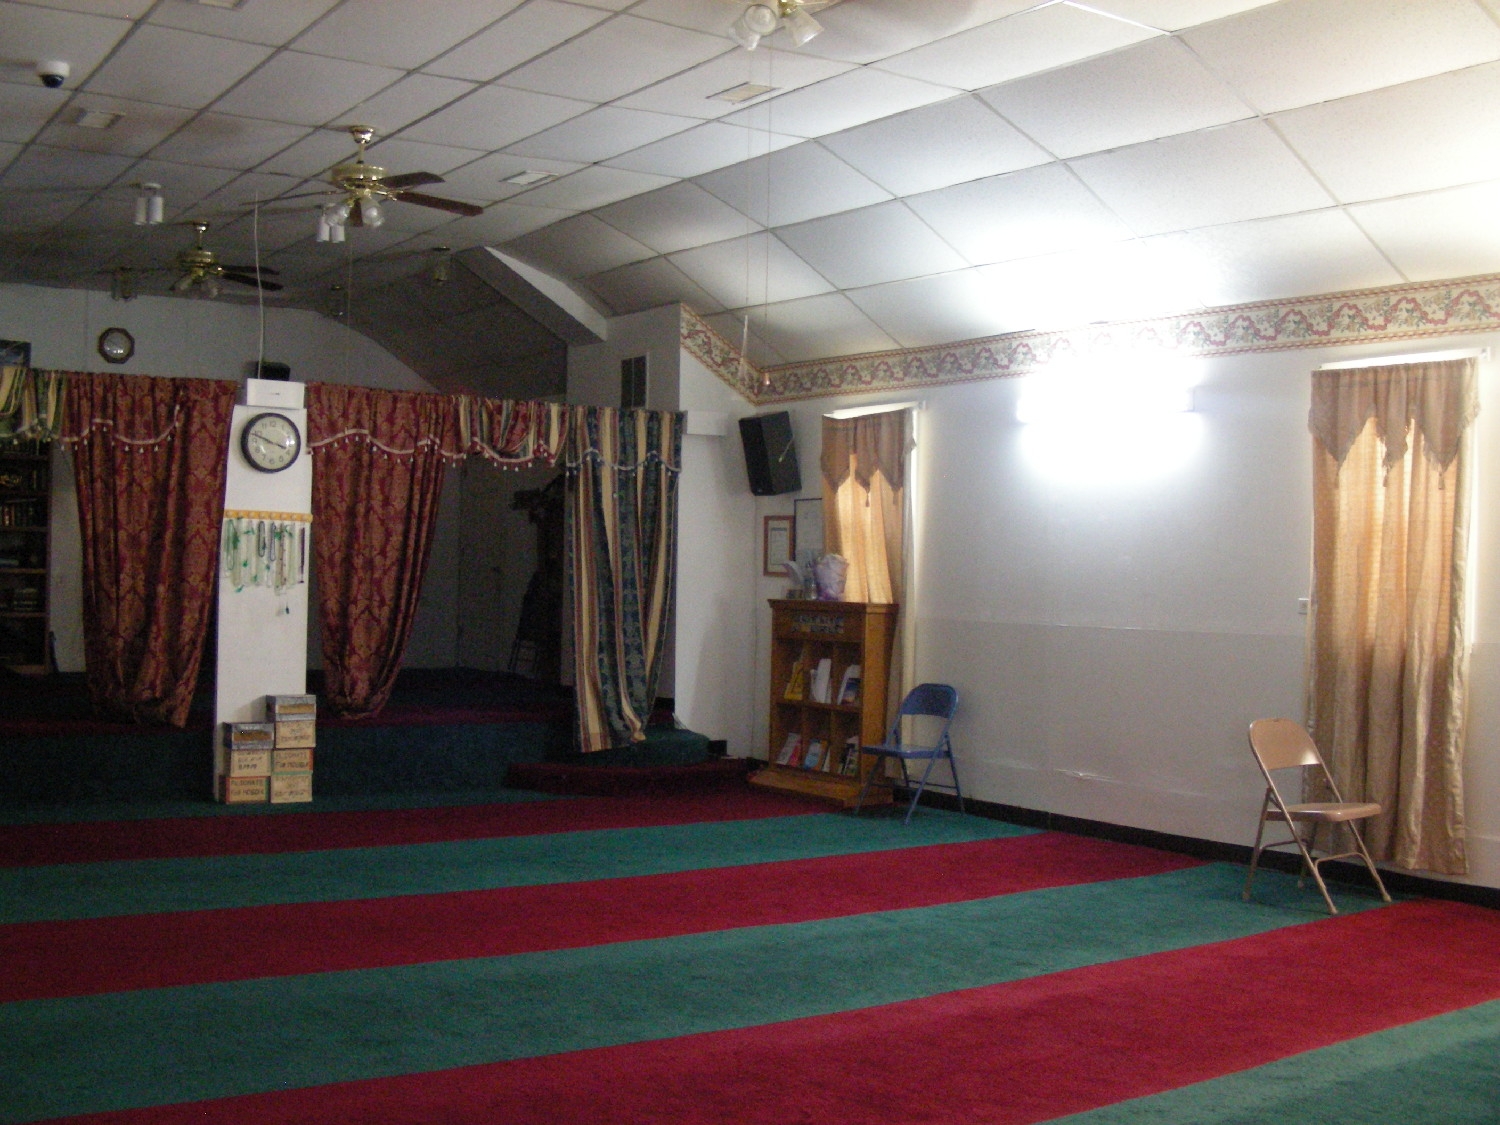 Prayer hall, looking towards the rear. The curtains separate the women's area.